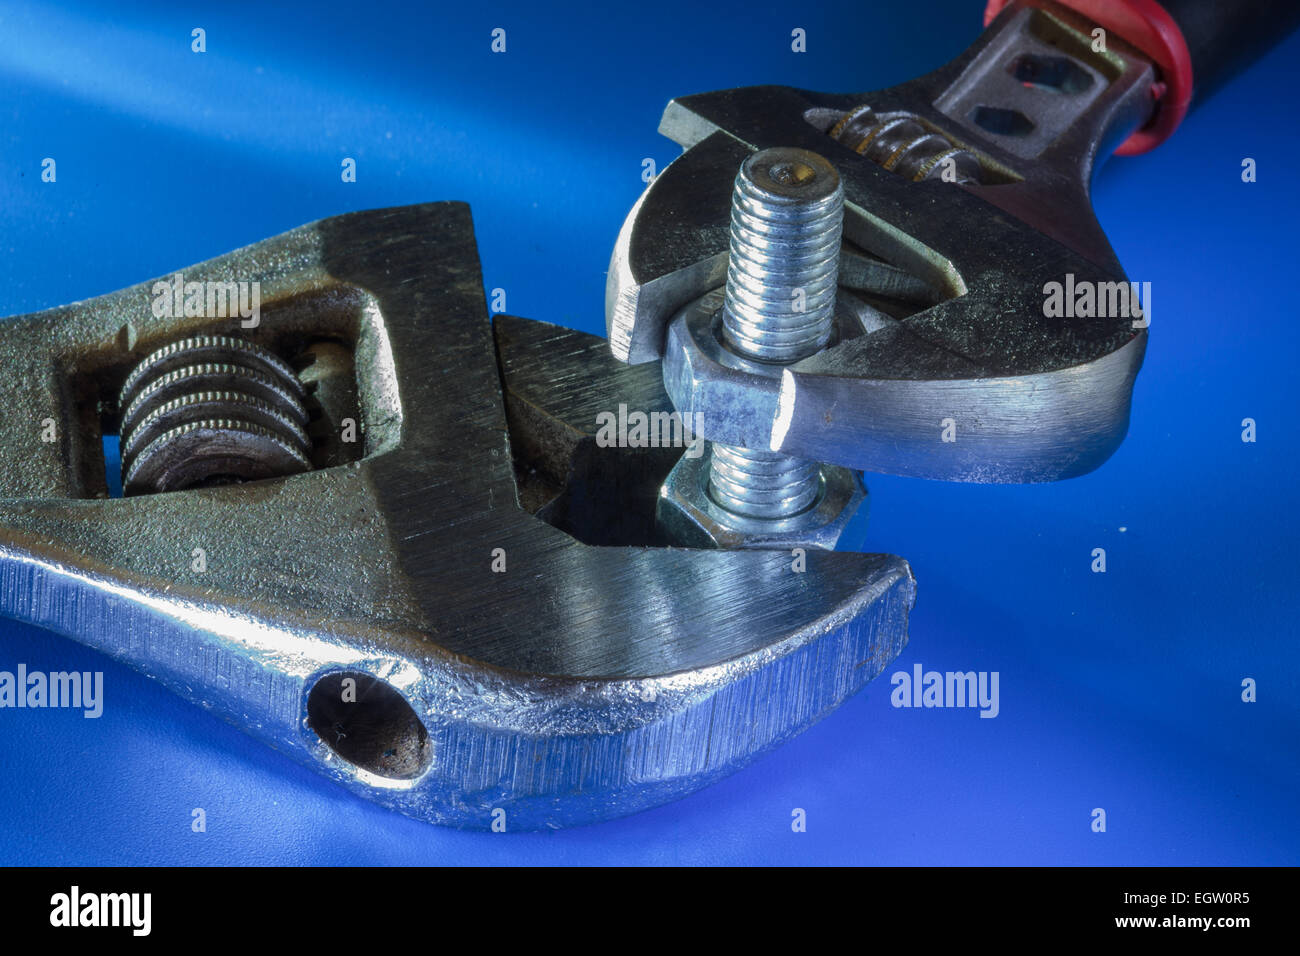 Adjustable wrench and bolt with nuts. Stock Photo